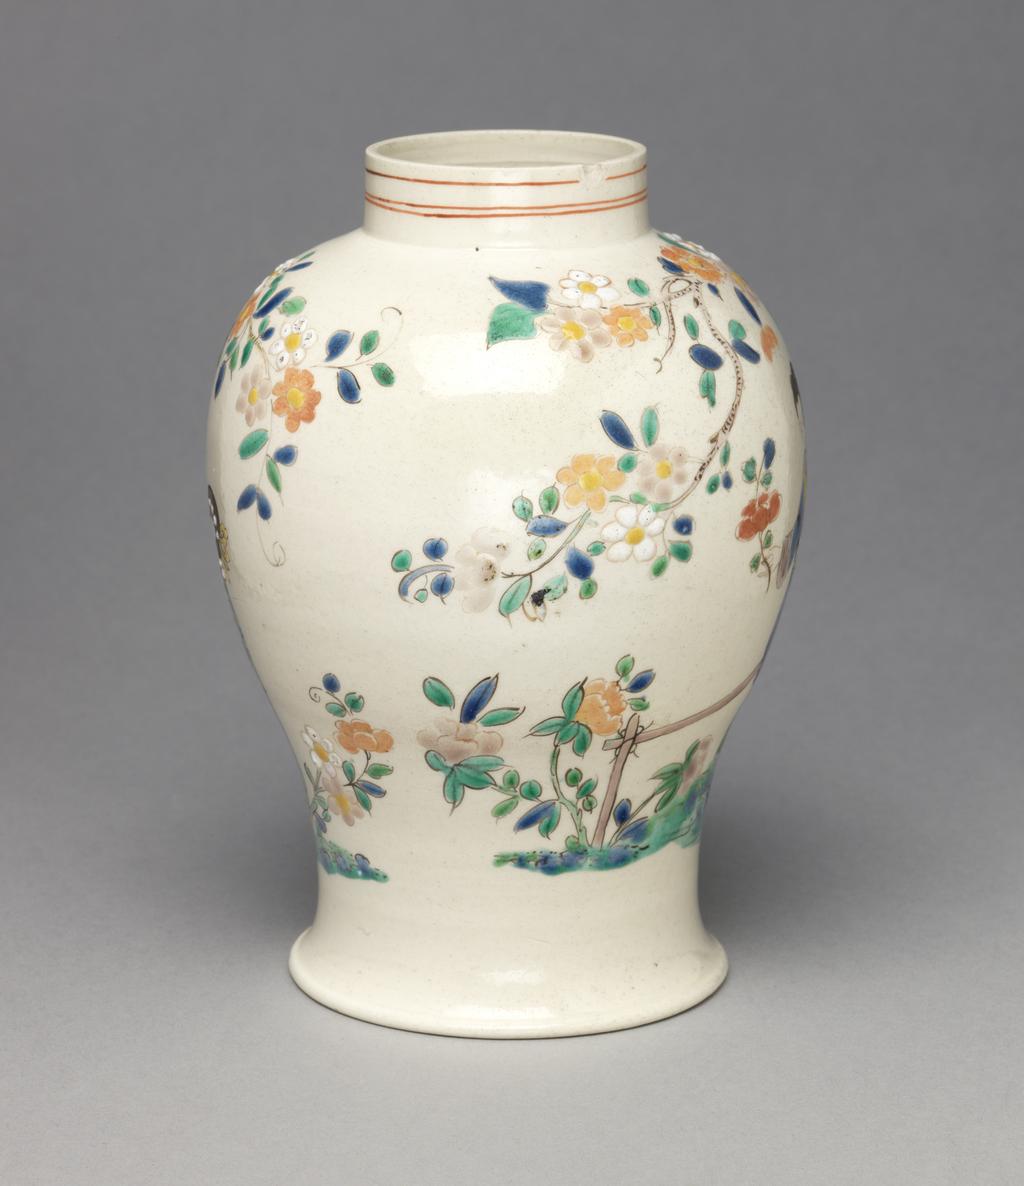 An image of Vase. Unidentified Staffordshire factory, England. Painted in polychrome enamels with Chinese figures in a garden with rocks, a fence, flowering trees and plants. Of squat meiping form with a narrow neck. The sides are decorated with a continuous Chinese garden scene. On one side, a lady stands holding a flower beside a fence with a flowering plant on the left. To her right is a rock formation and a tree with a flowering branch which extends over her. Another flowering branch extends to the right over a seated man and a standing woman. Round the neck there are three narrow red horizontal lines. Off-white stoneware, thrown, salt-glazed, and painted in blue, turquoise, green, yellow, pale salmon-pink, a little red, pale pinkish-purple, and black enamels. Height, whole, 14.7 cm, diameter, whole, 10.5 cm, diameter, foot, 7.8 cm, circa 1755-1760. Rococo. Chinoiserie. Sir Ivor and Lady Batchelor Bequest through The Art Fund.